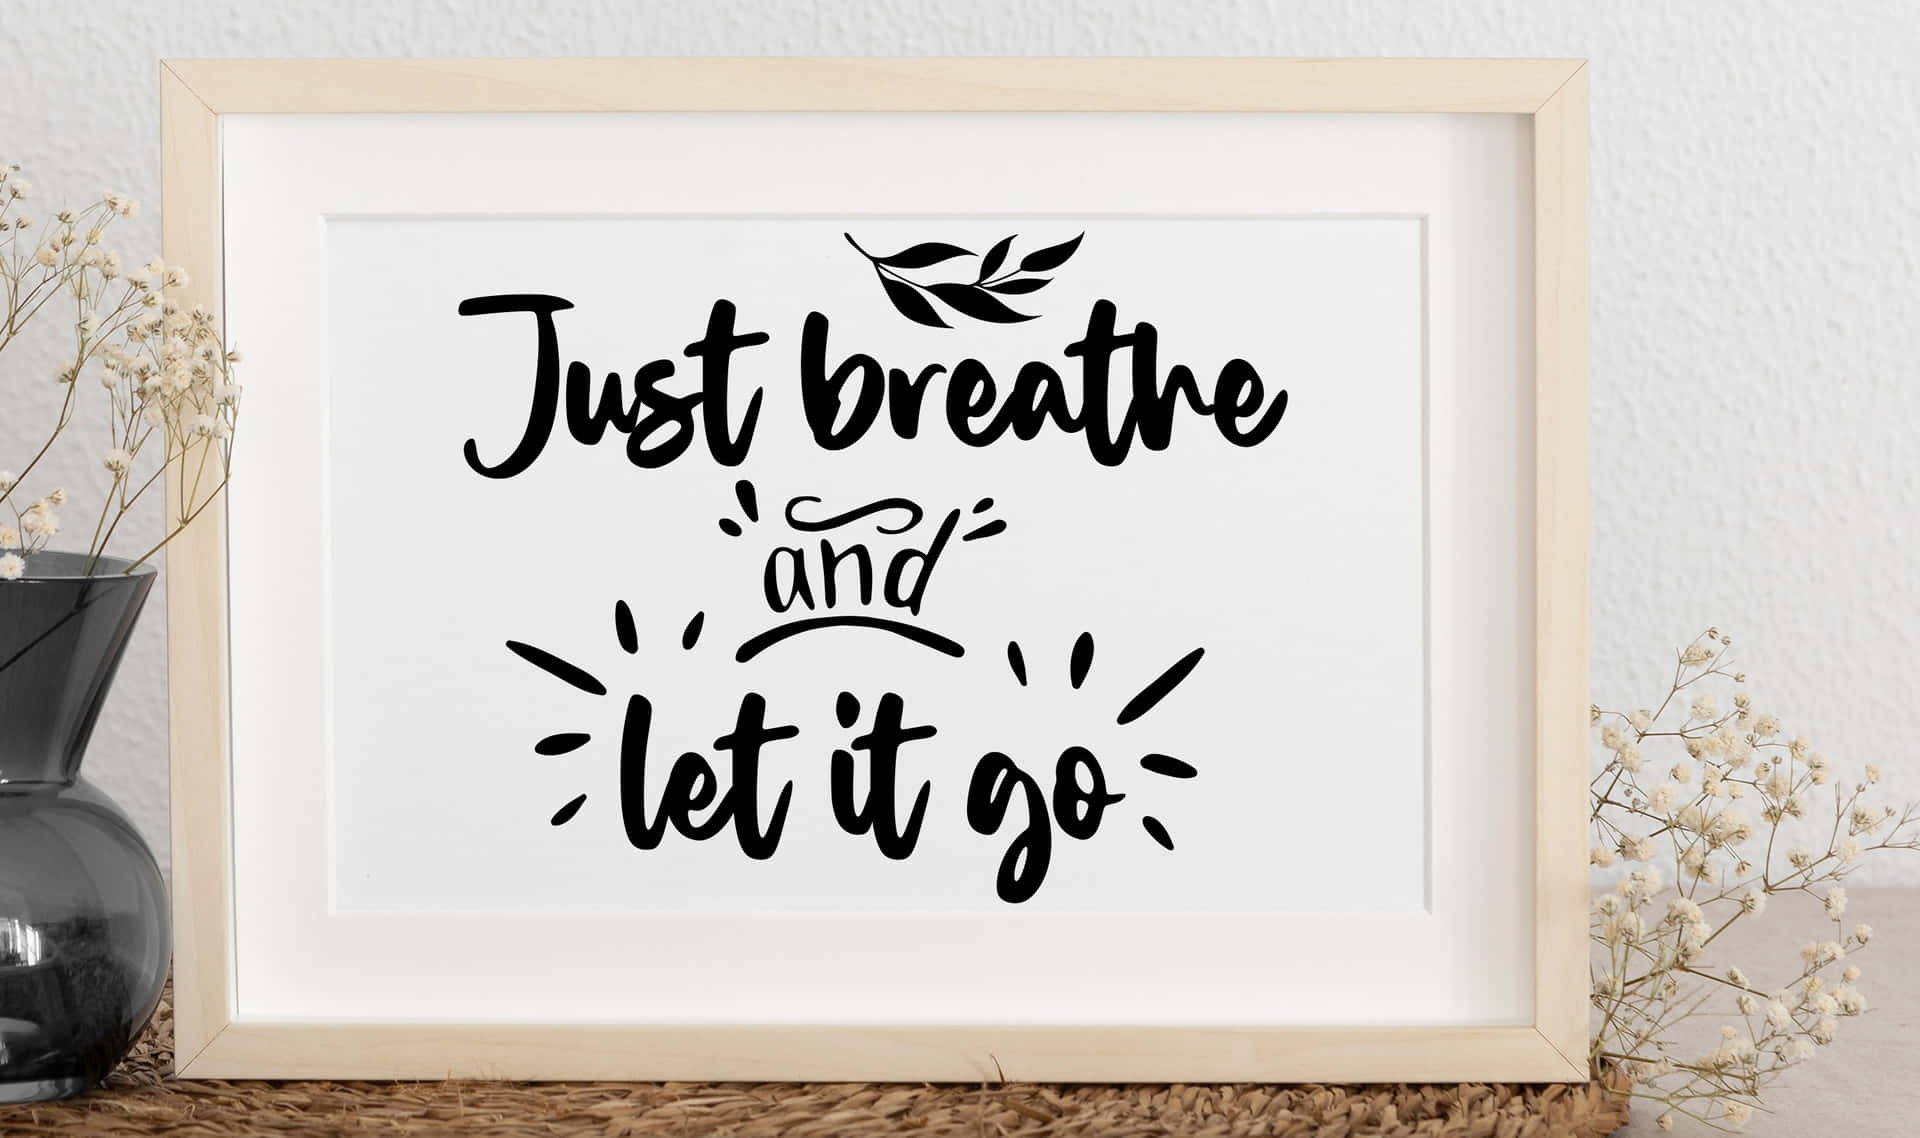 Embracing Tranquility with a Breathe&Let It Go Image Wallpaper